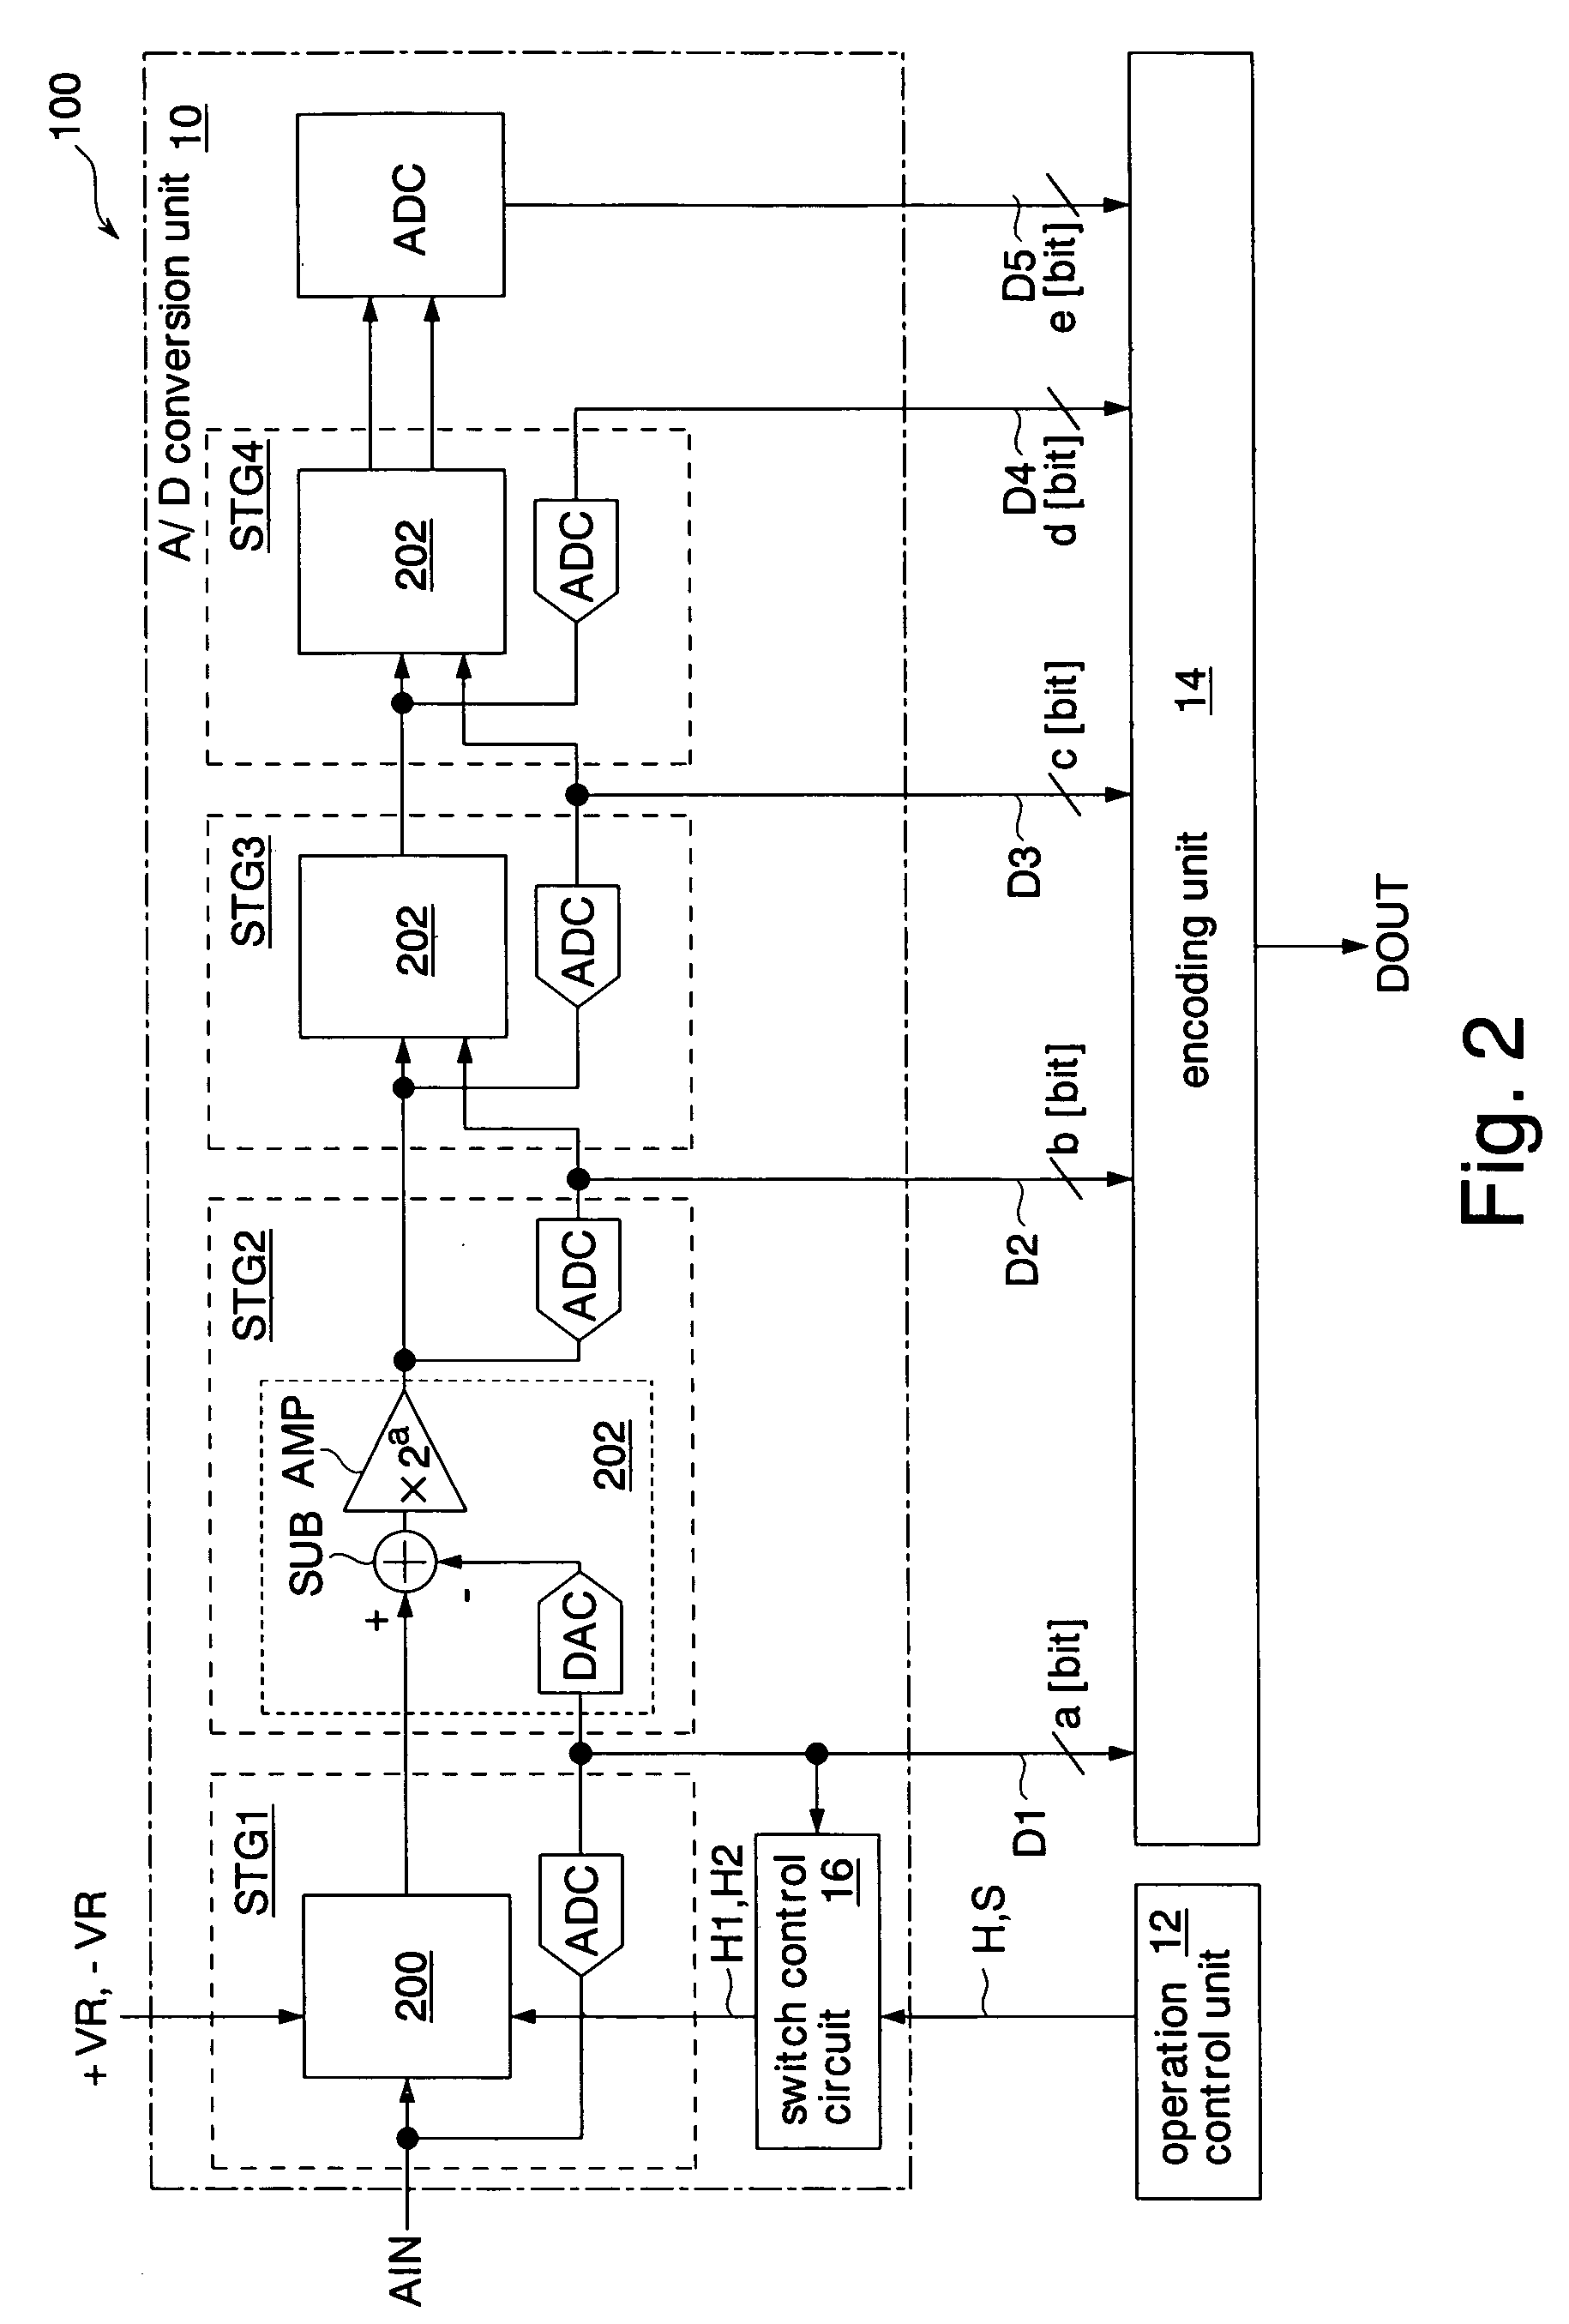 Switched-capacitor circuit and pipelined a/d converter